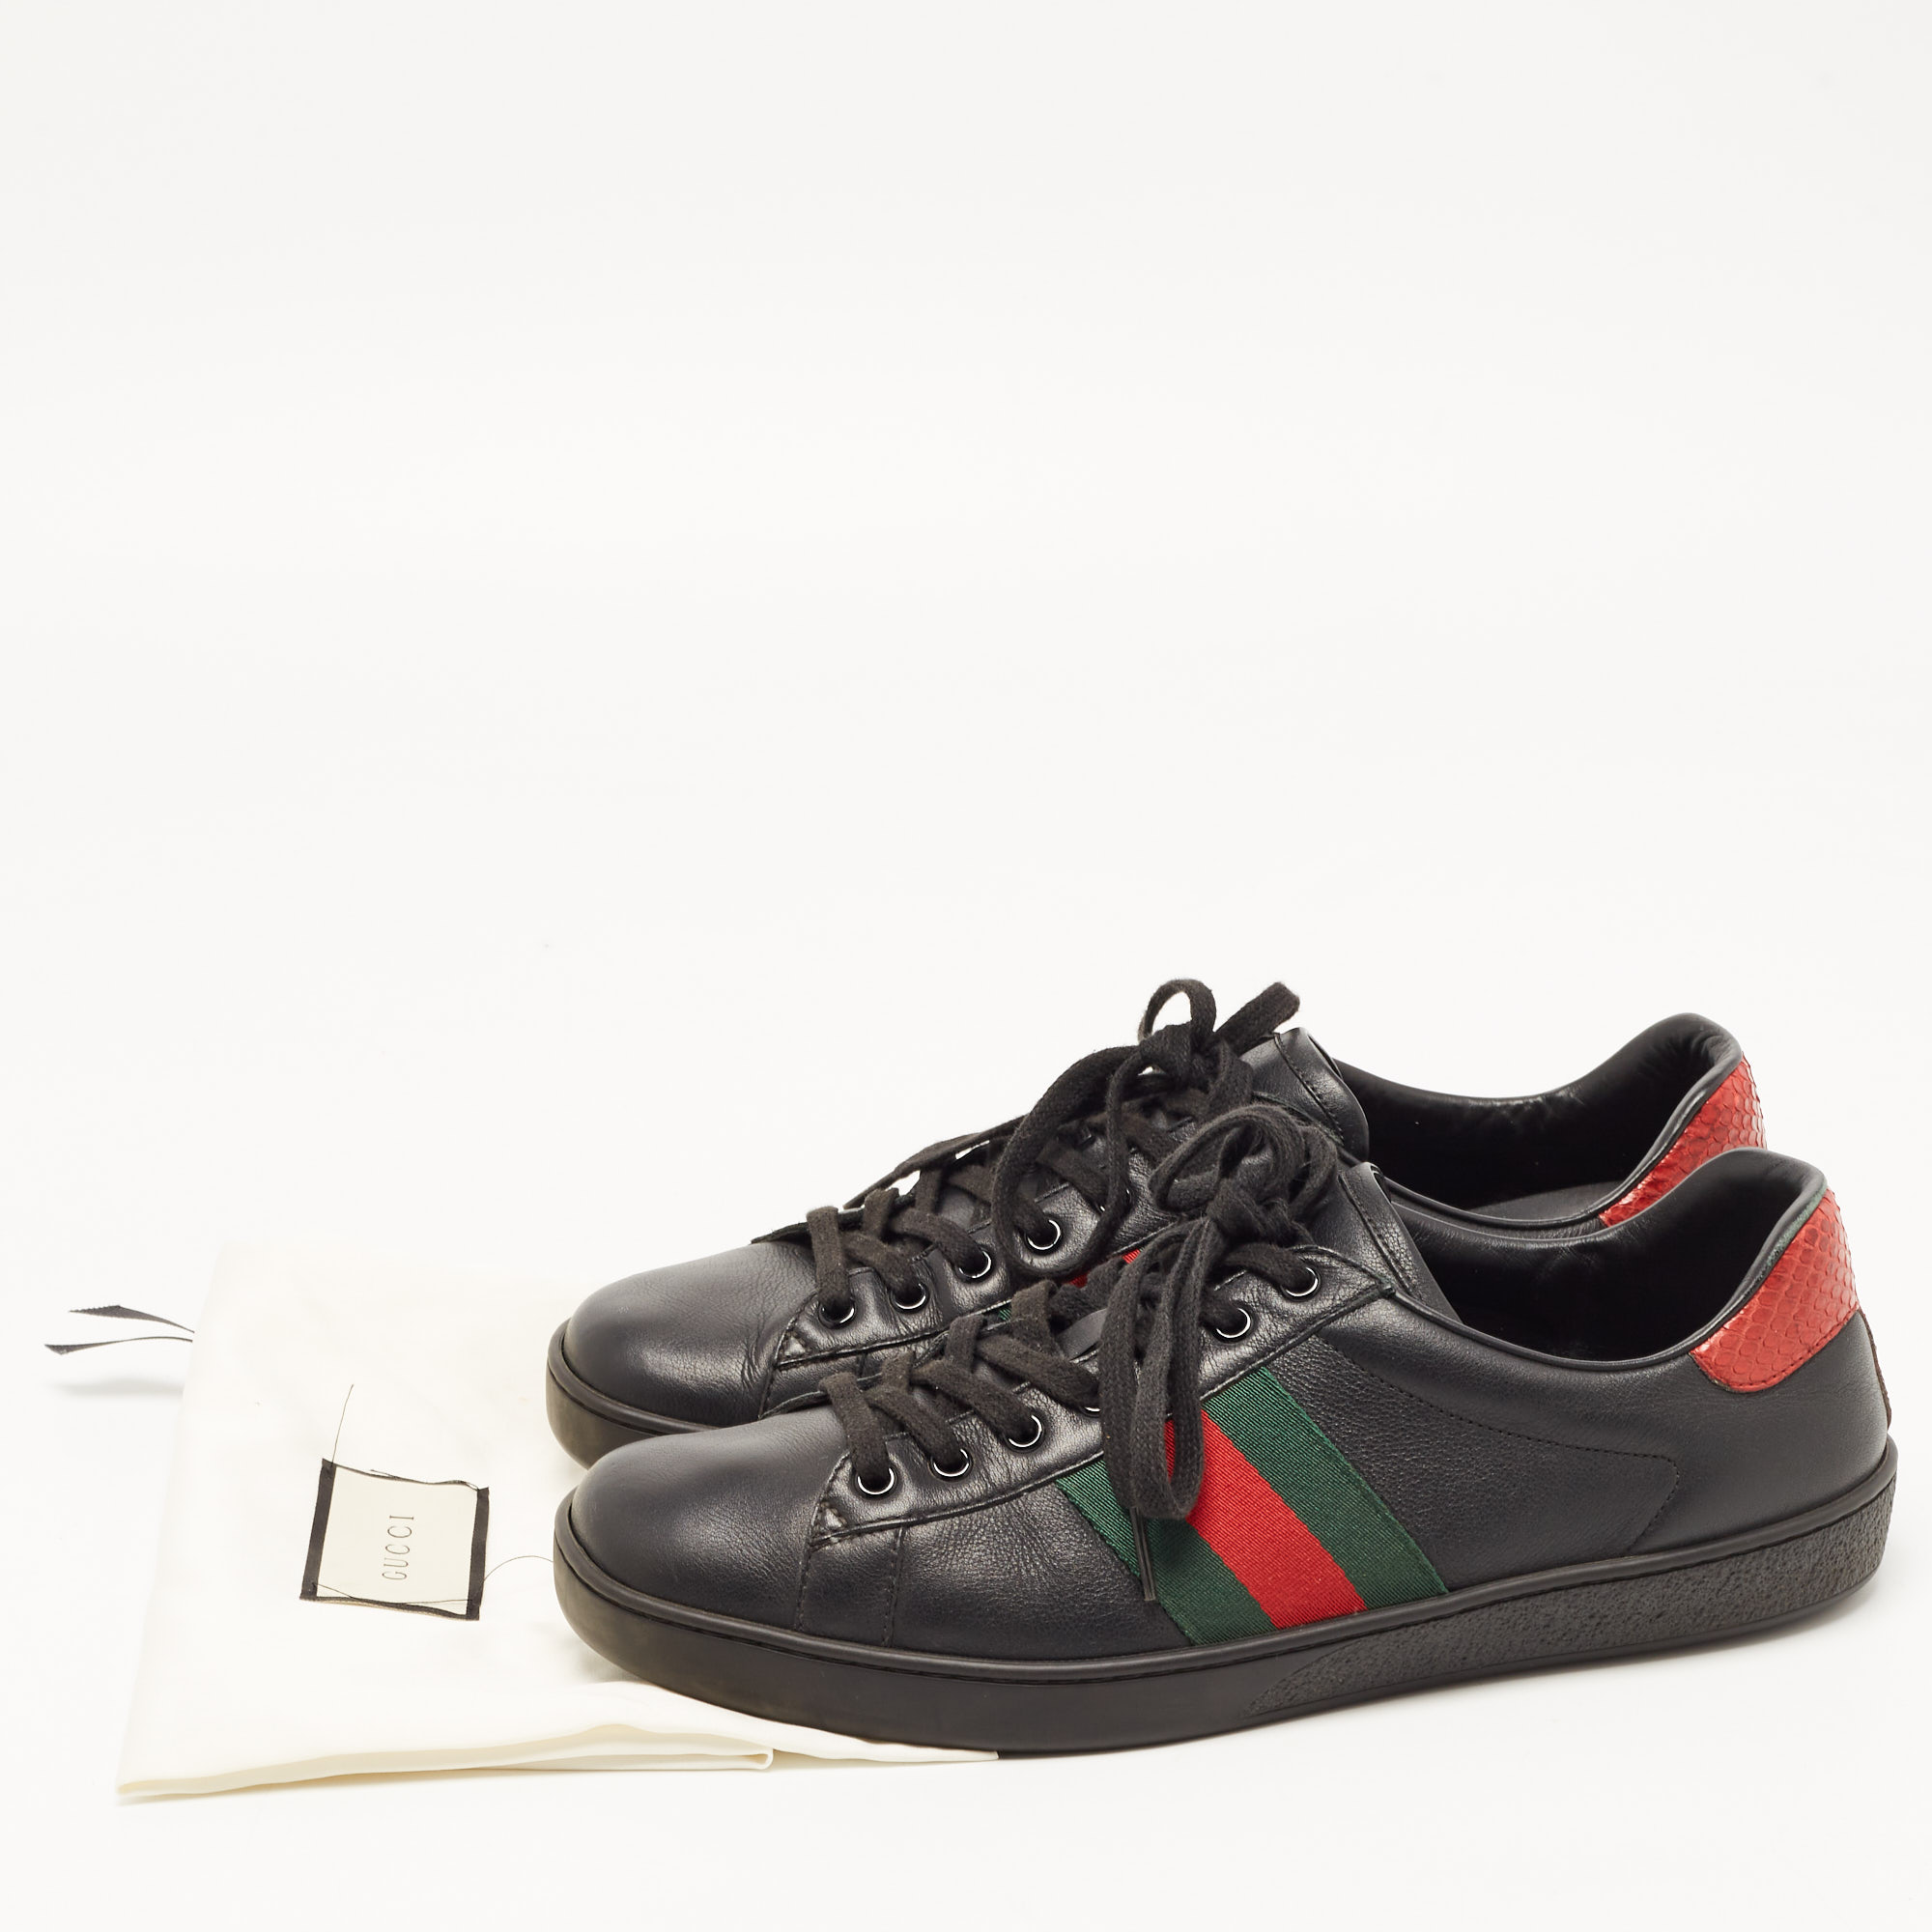 Gucci Black Leather Ace Web Low Top Sneakers Size 42